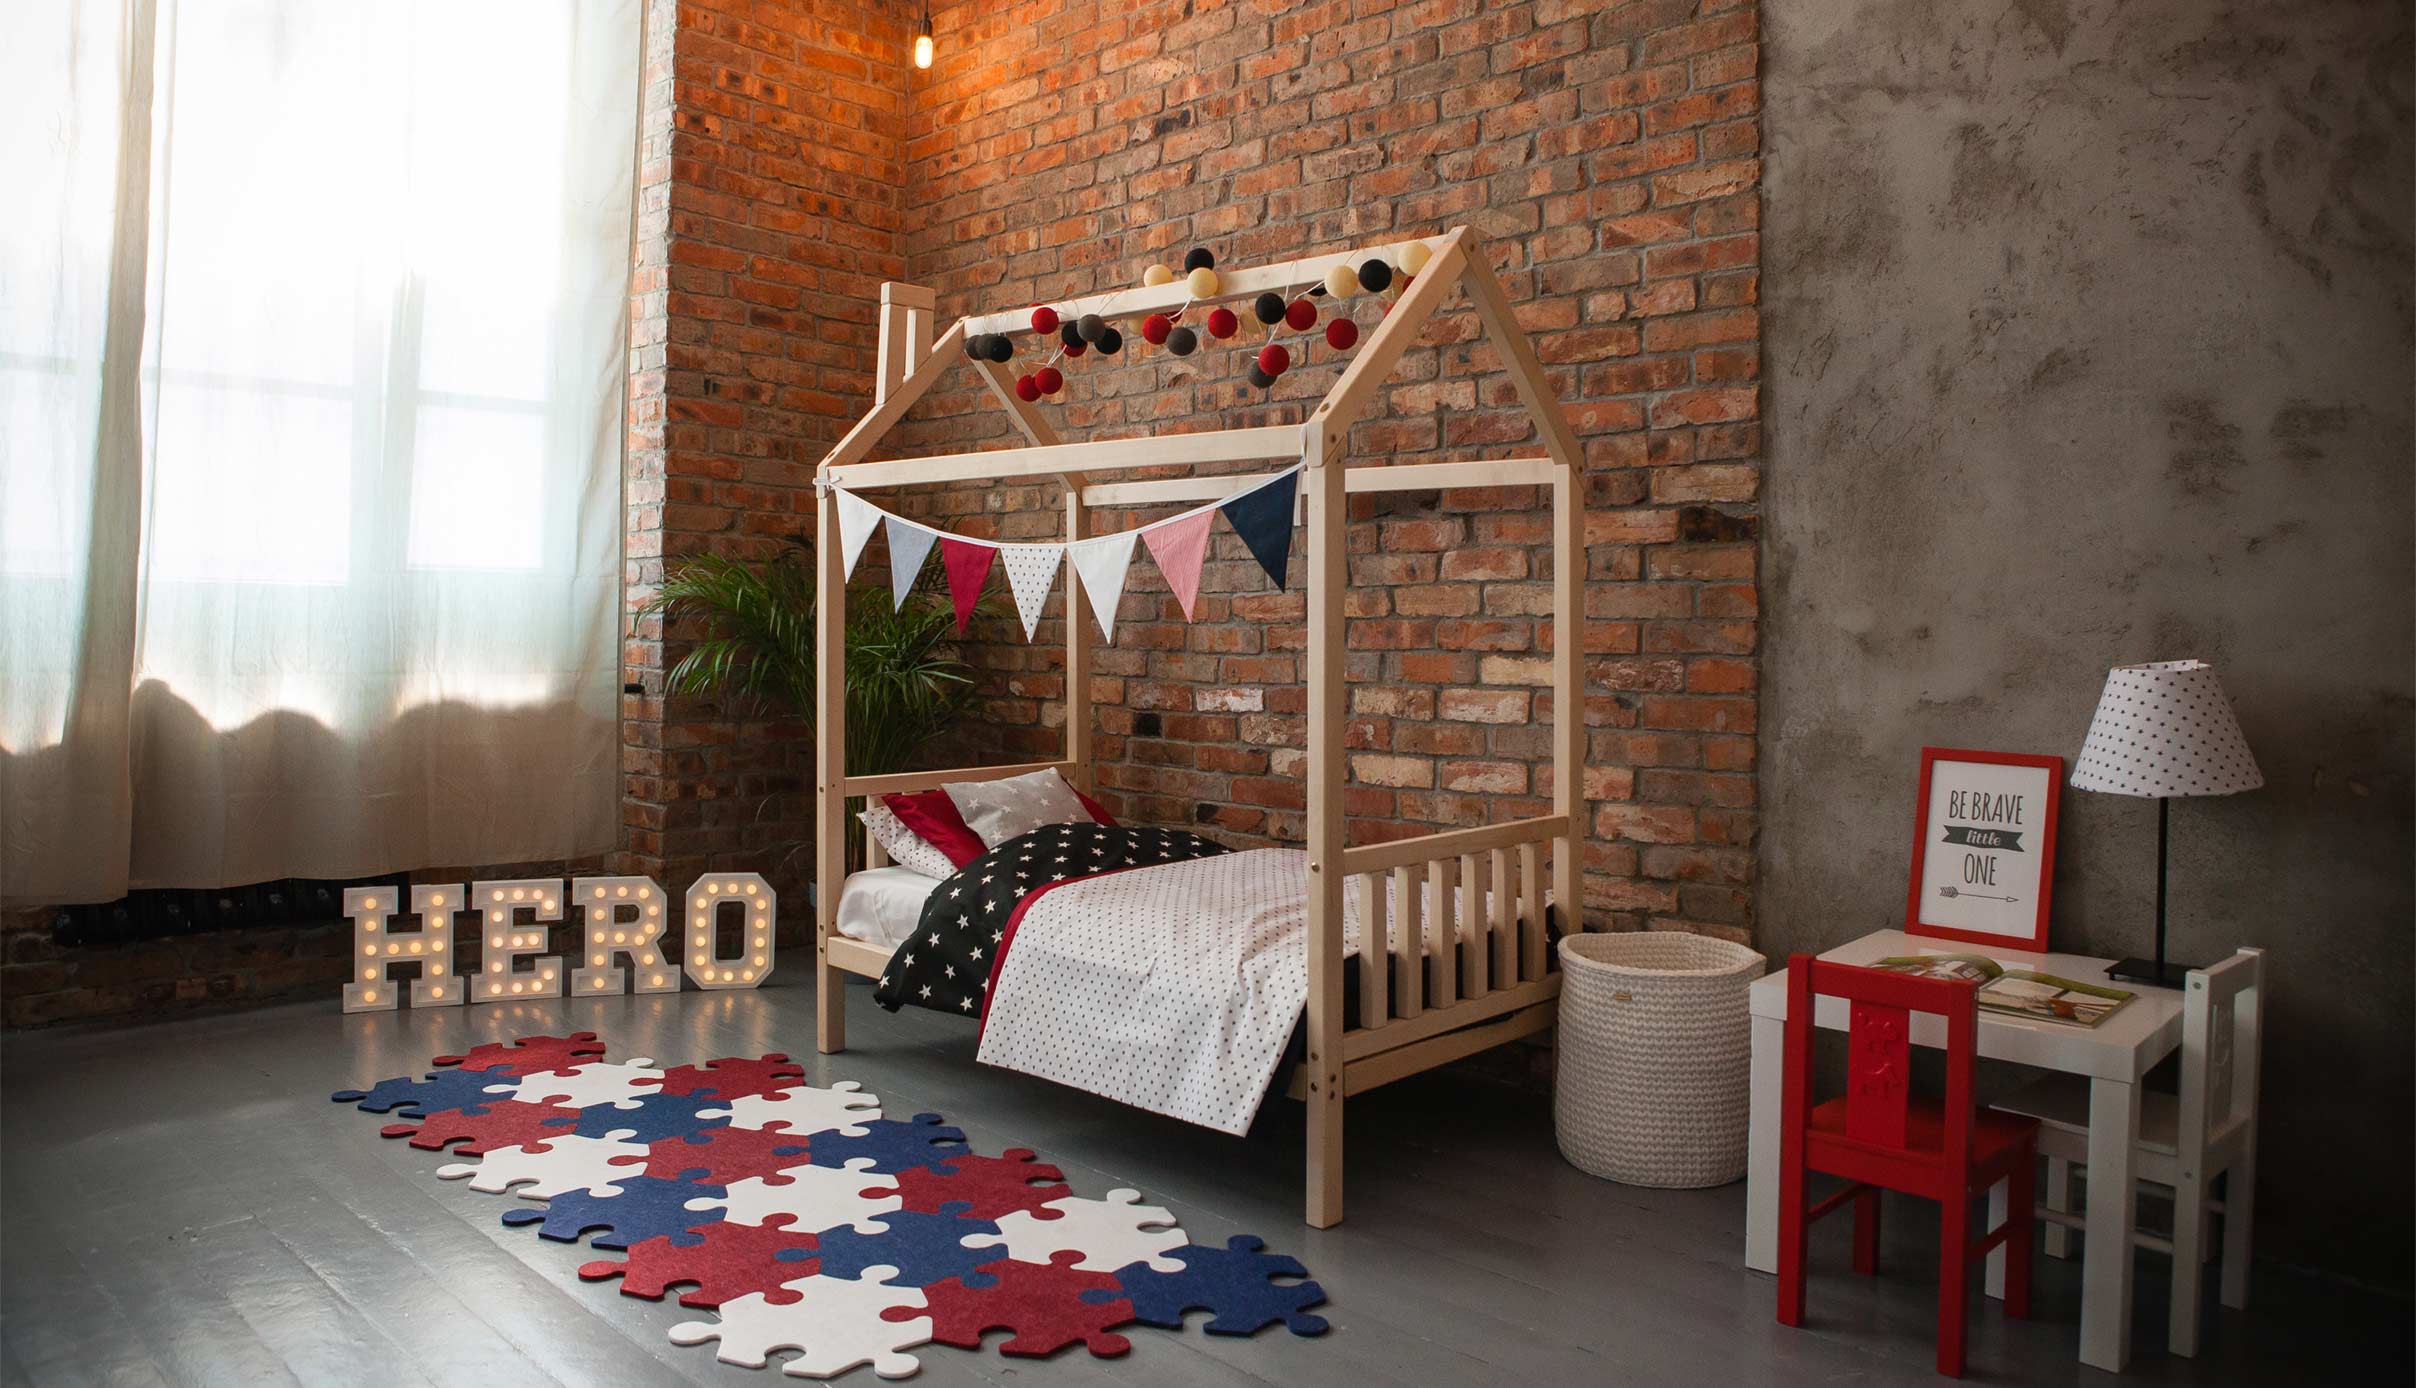 A child's bedroom with a wooden bed and a brick wall.